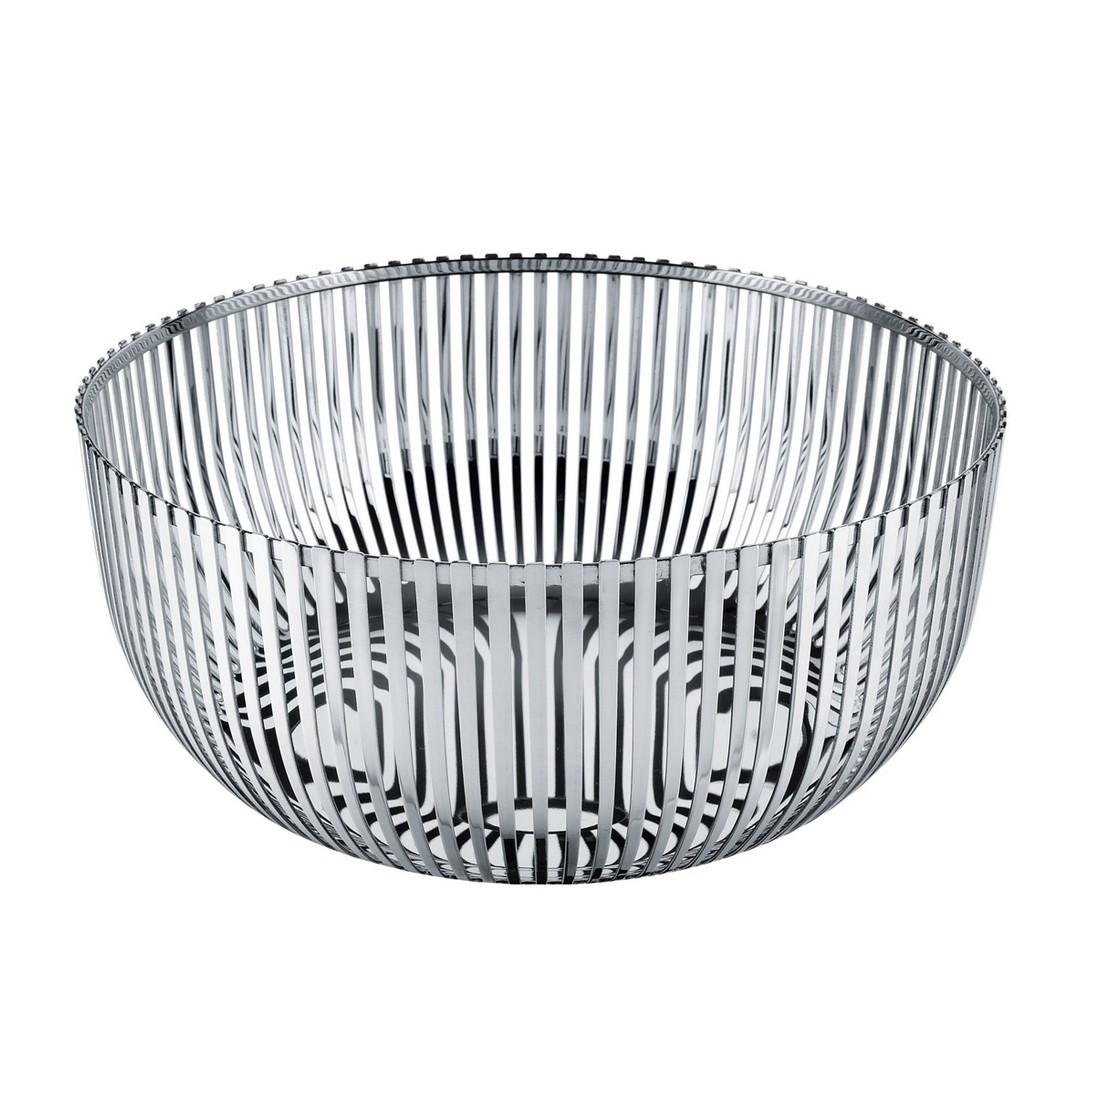 Alessi-CACTUS! 18/10 stainless steel perforated fruit bowl